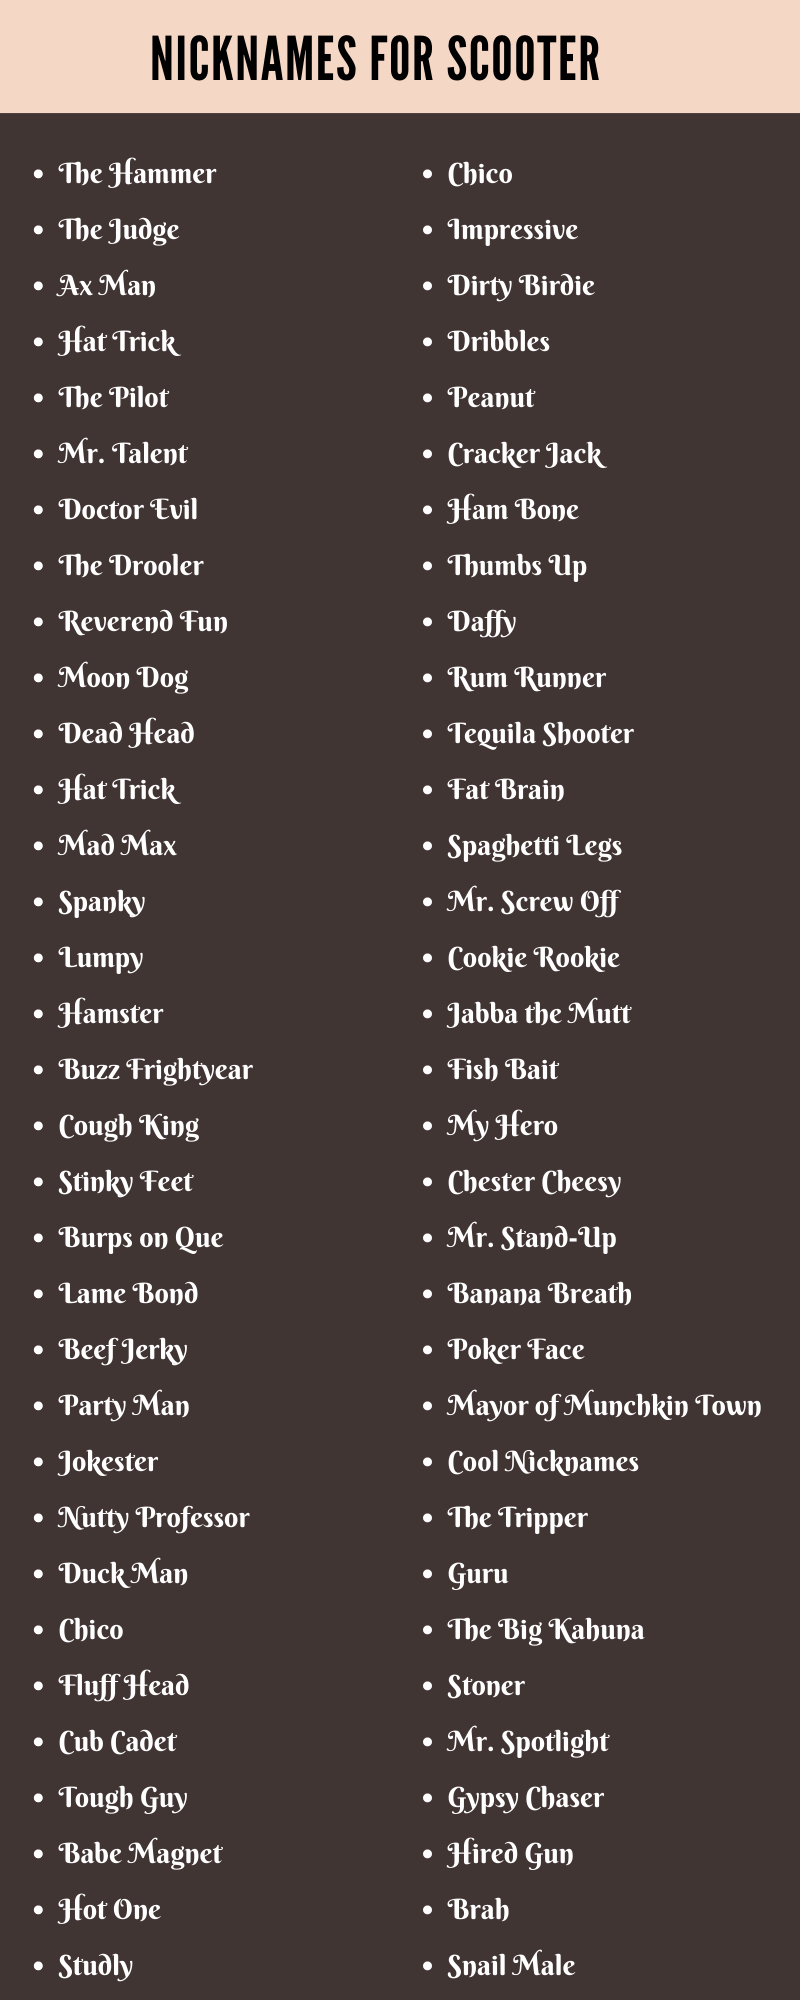 Nicknames for Scooter